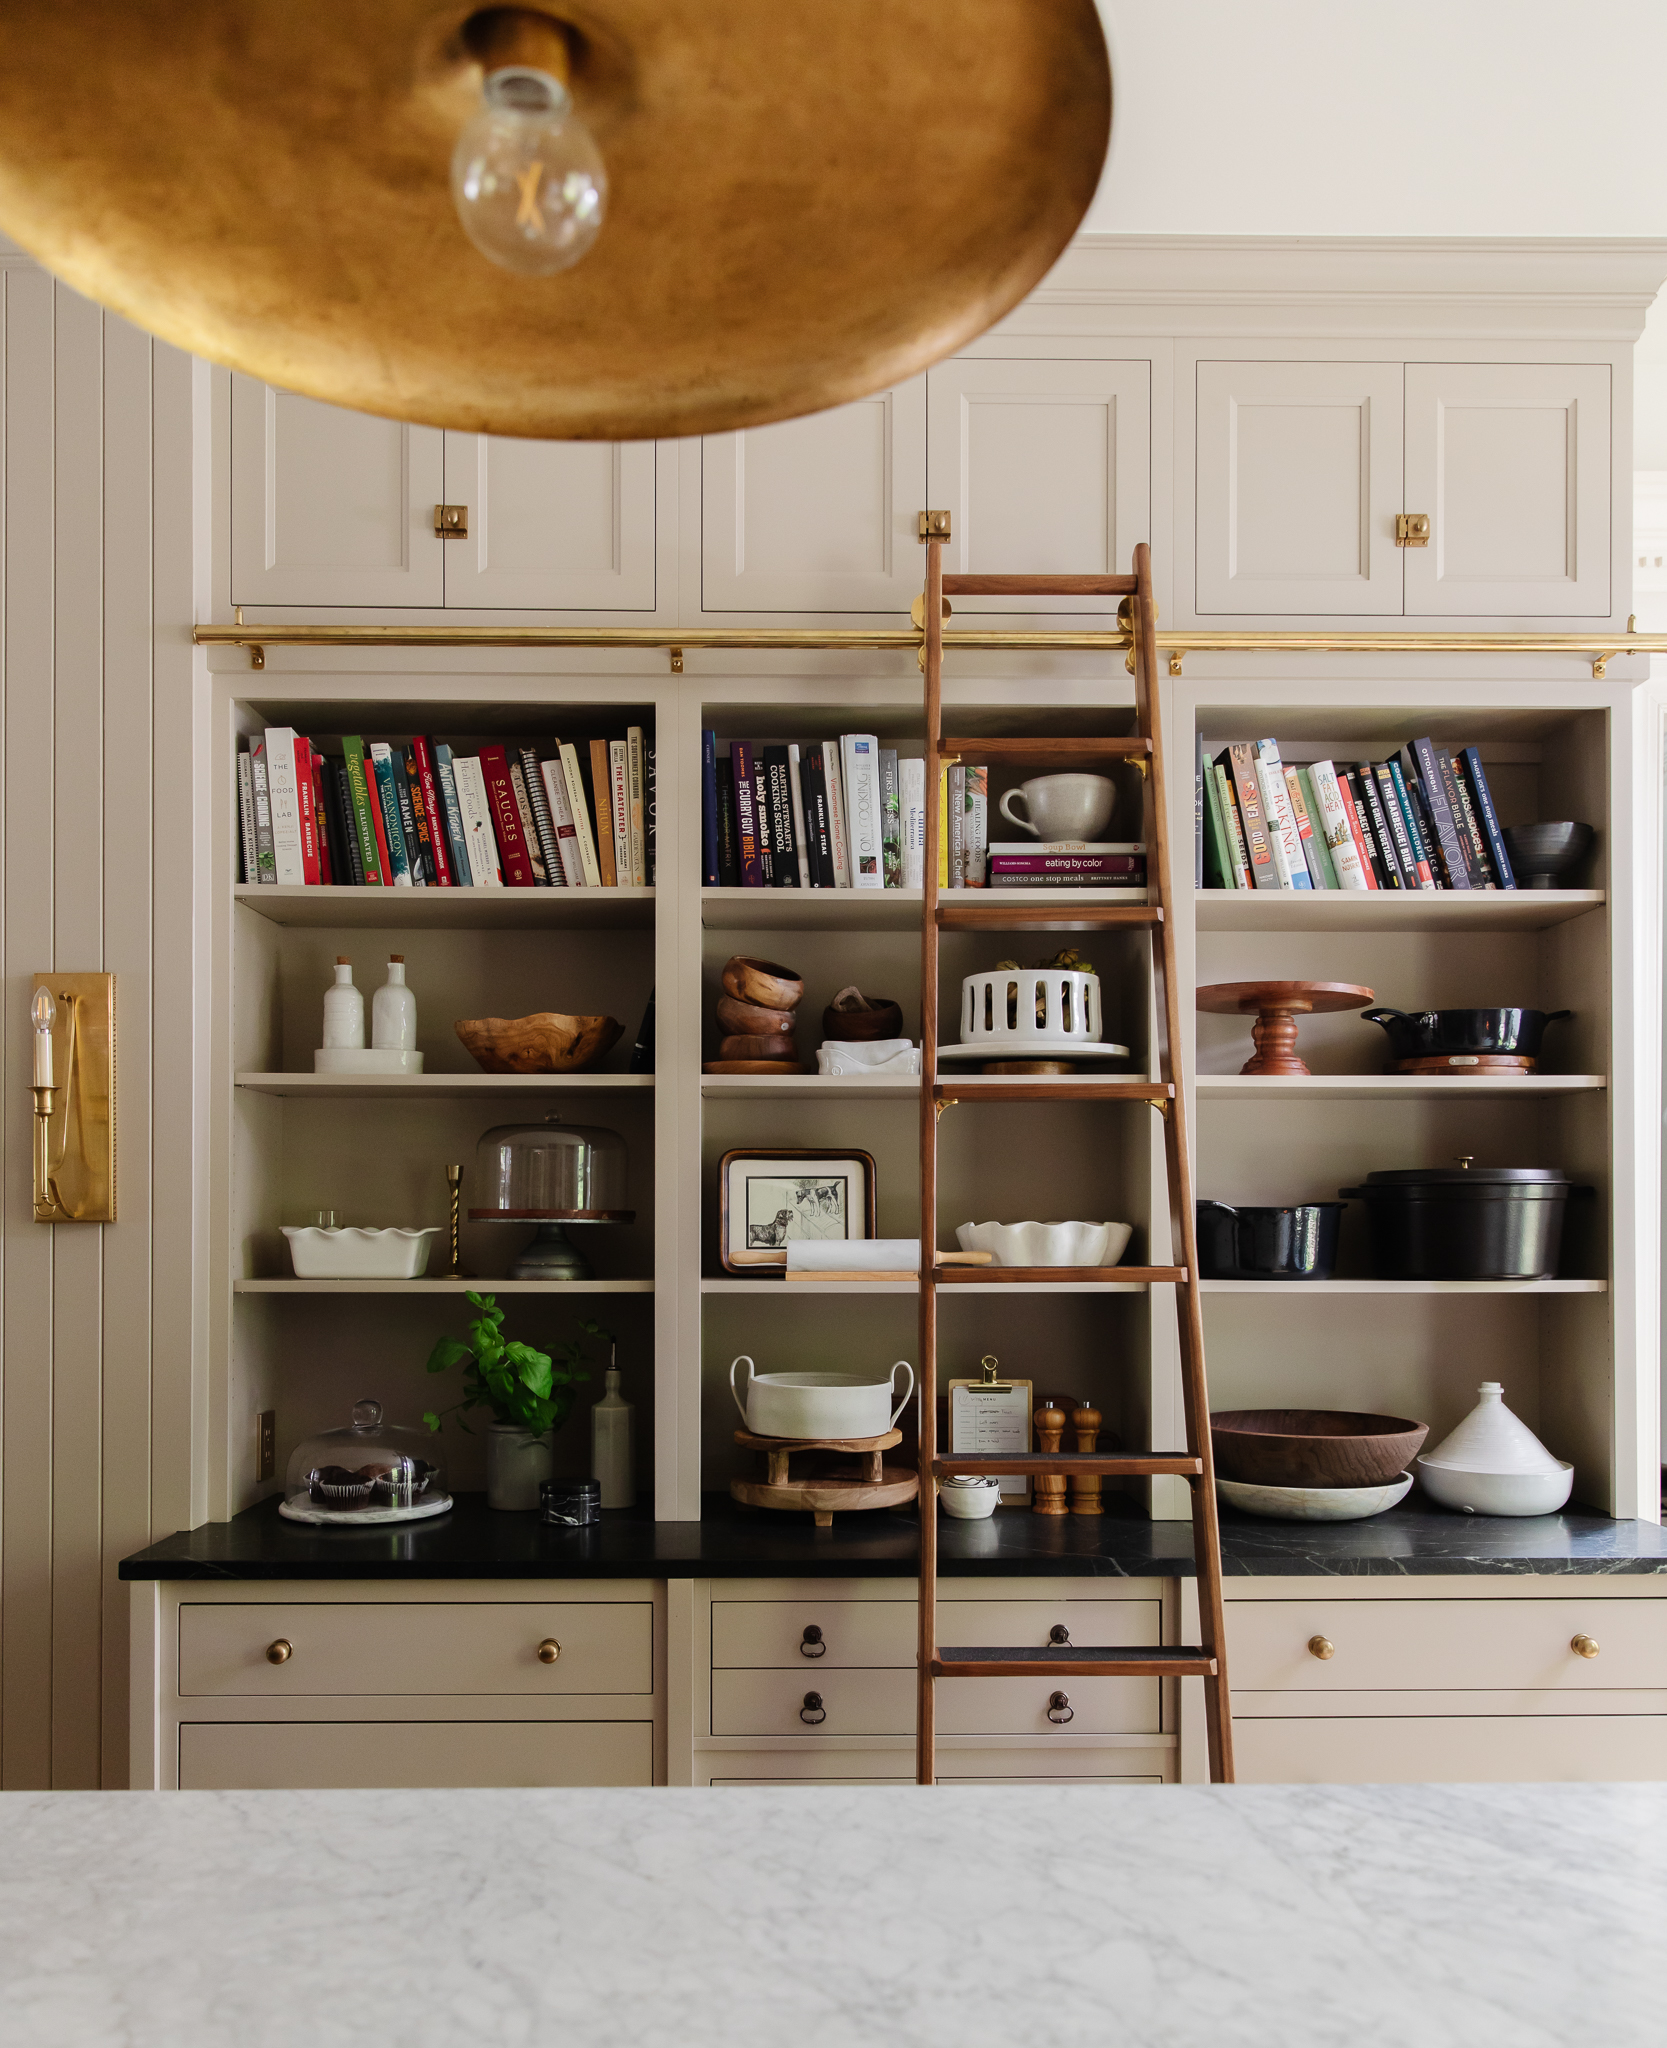 Chris Loves Julia | Kitchen with open cabinets and library ladder